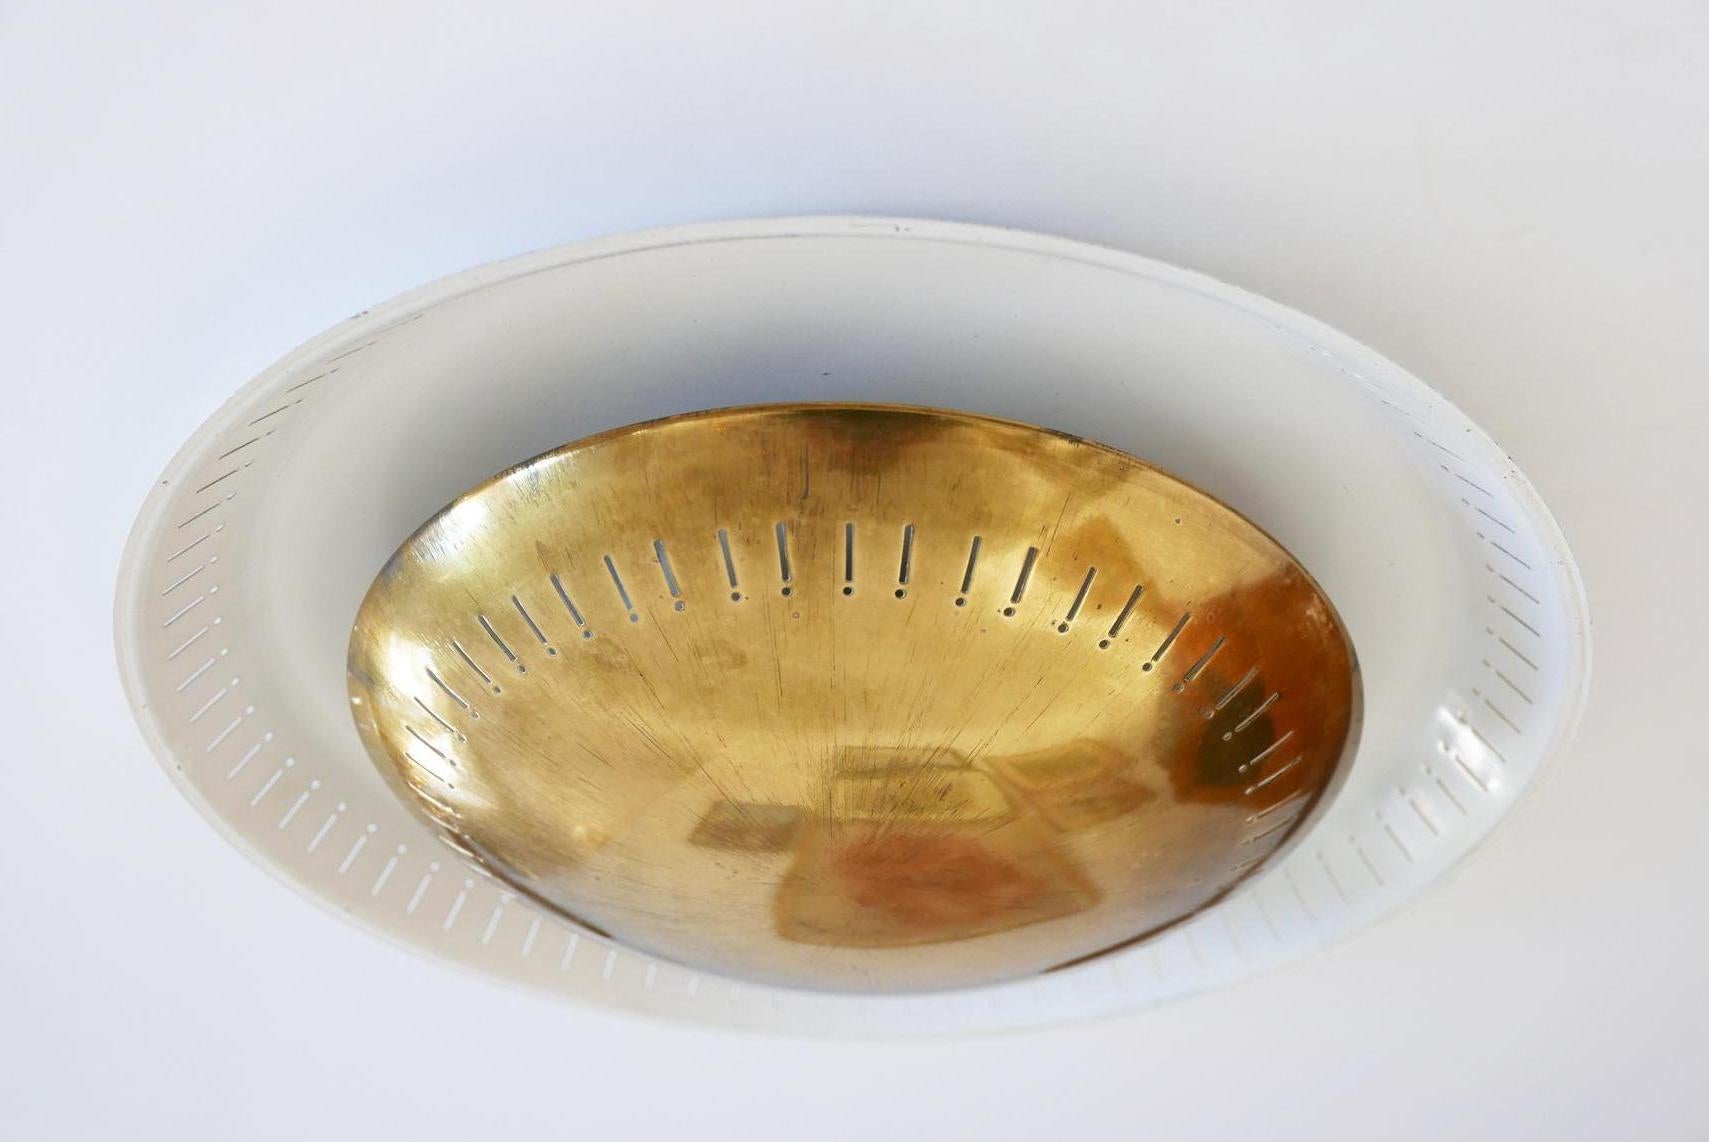 Lacquered Mid-Century Modern Flush Mount or Wall Lamp by Hillebrand, 1950s, Germany